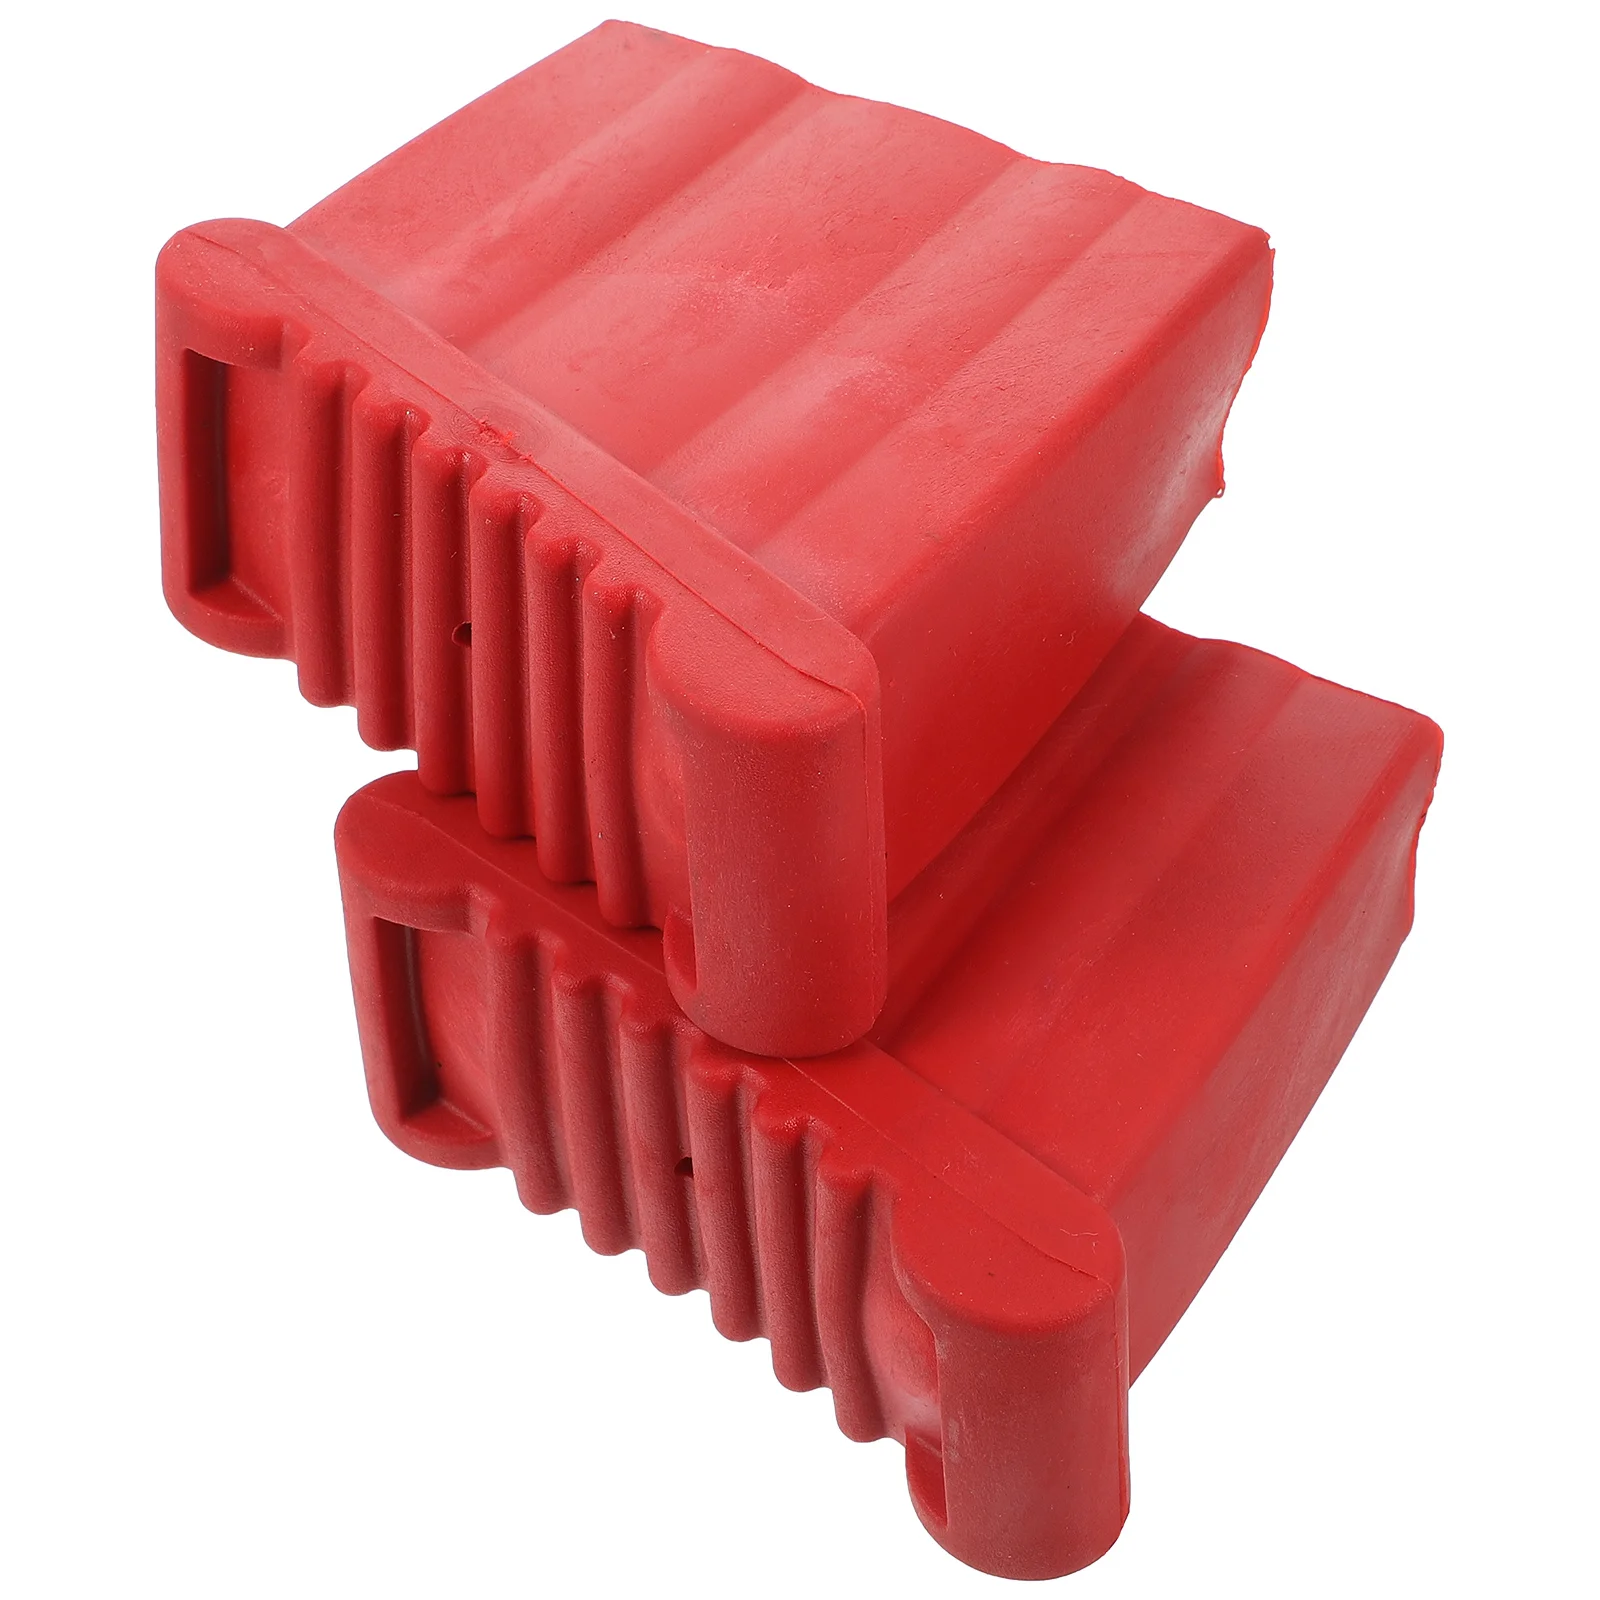 

2 Pcs Chairs Ladder Foot Cover Accessories Telescoping Feet Mat Rubber Pads Red Parts Nonslip Step Covers